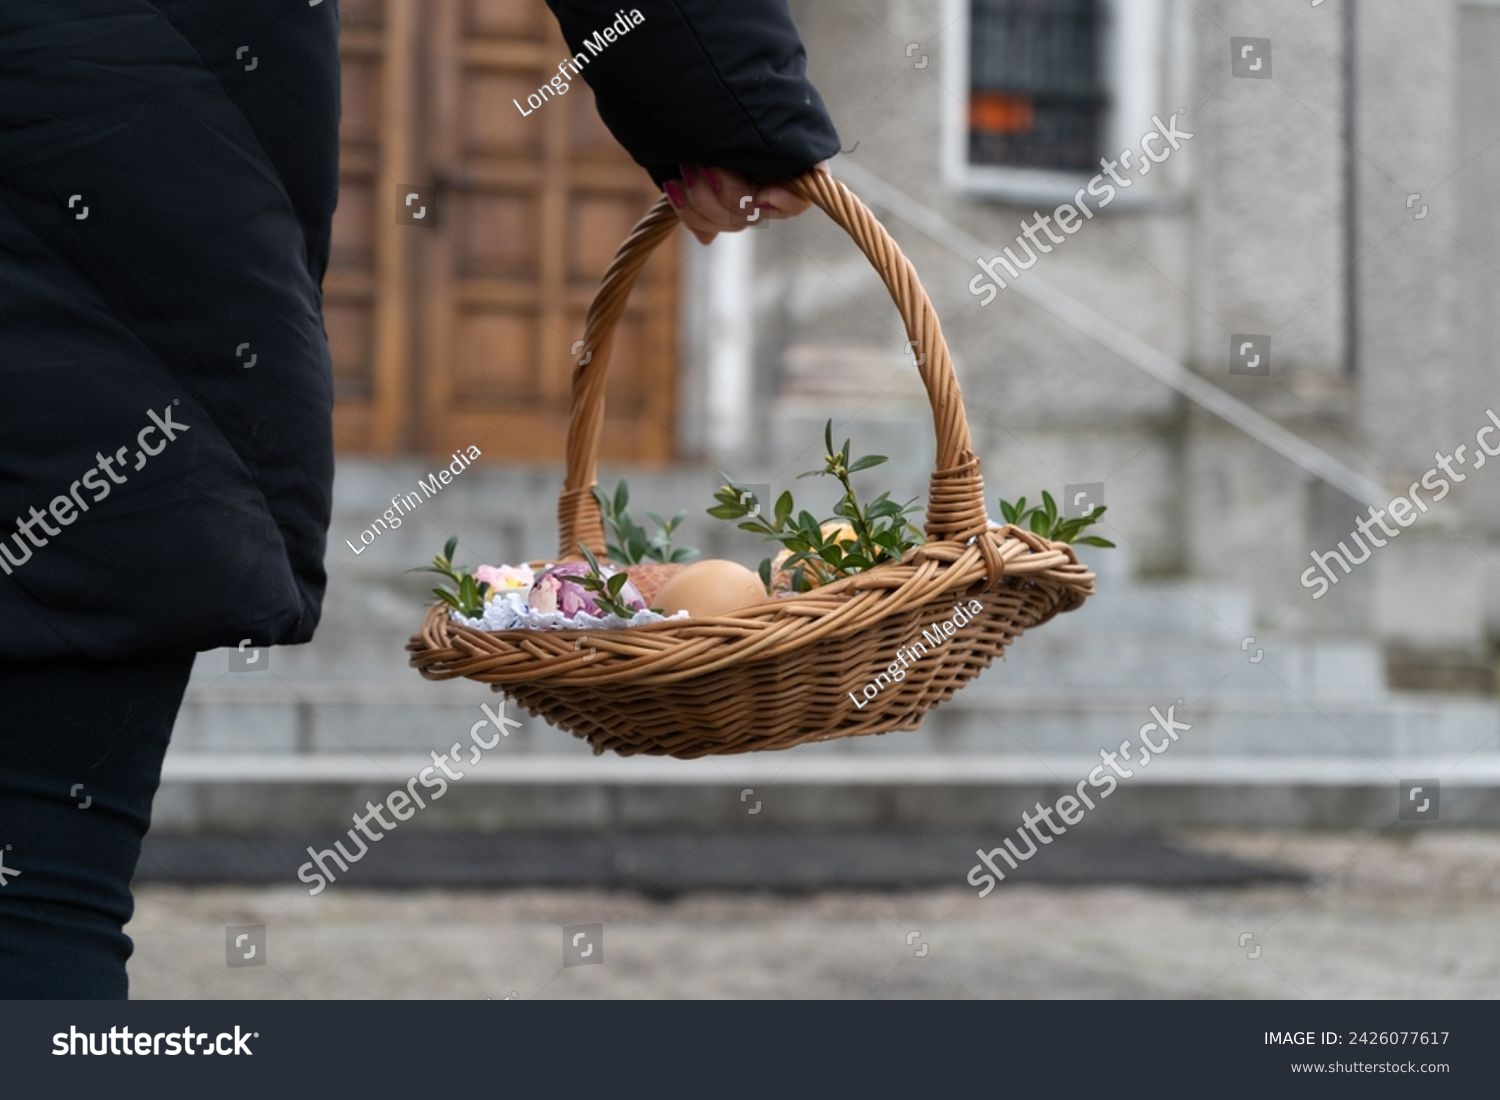 Woman holding Easter basket for blessing in a church. Traditional woven wicker Paschal basket filled with various food, ready to be blessed by a priest as part of the Easter tradition. #2426077617